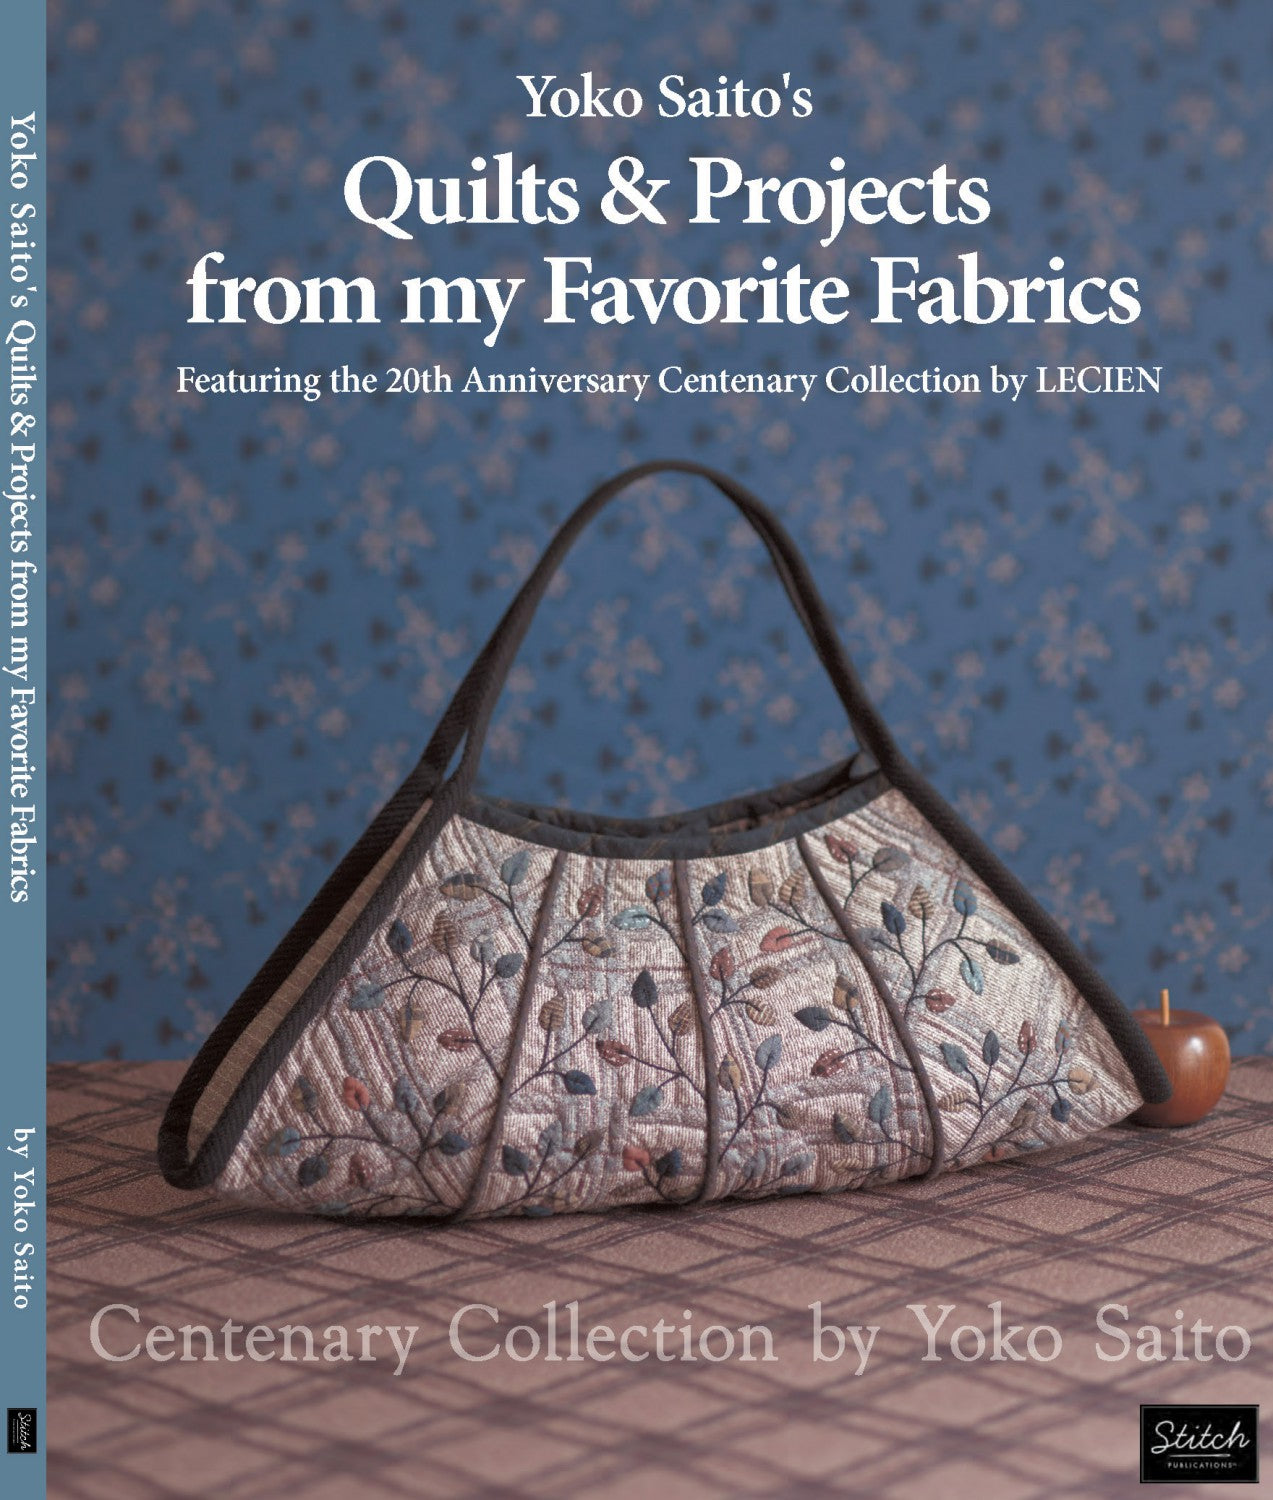 Quilts & Projects from my Favorite Fabrics